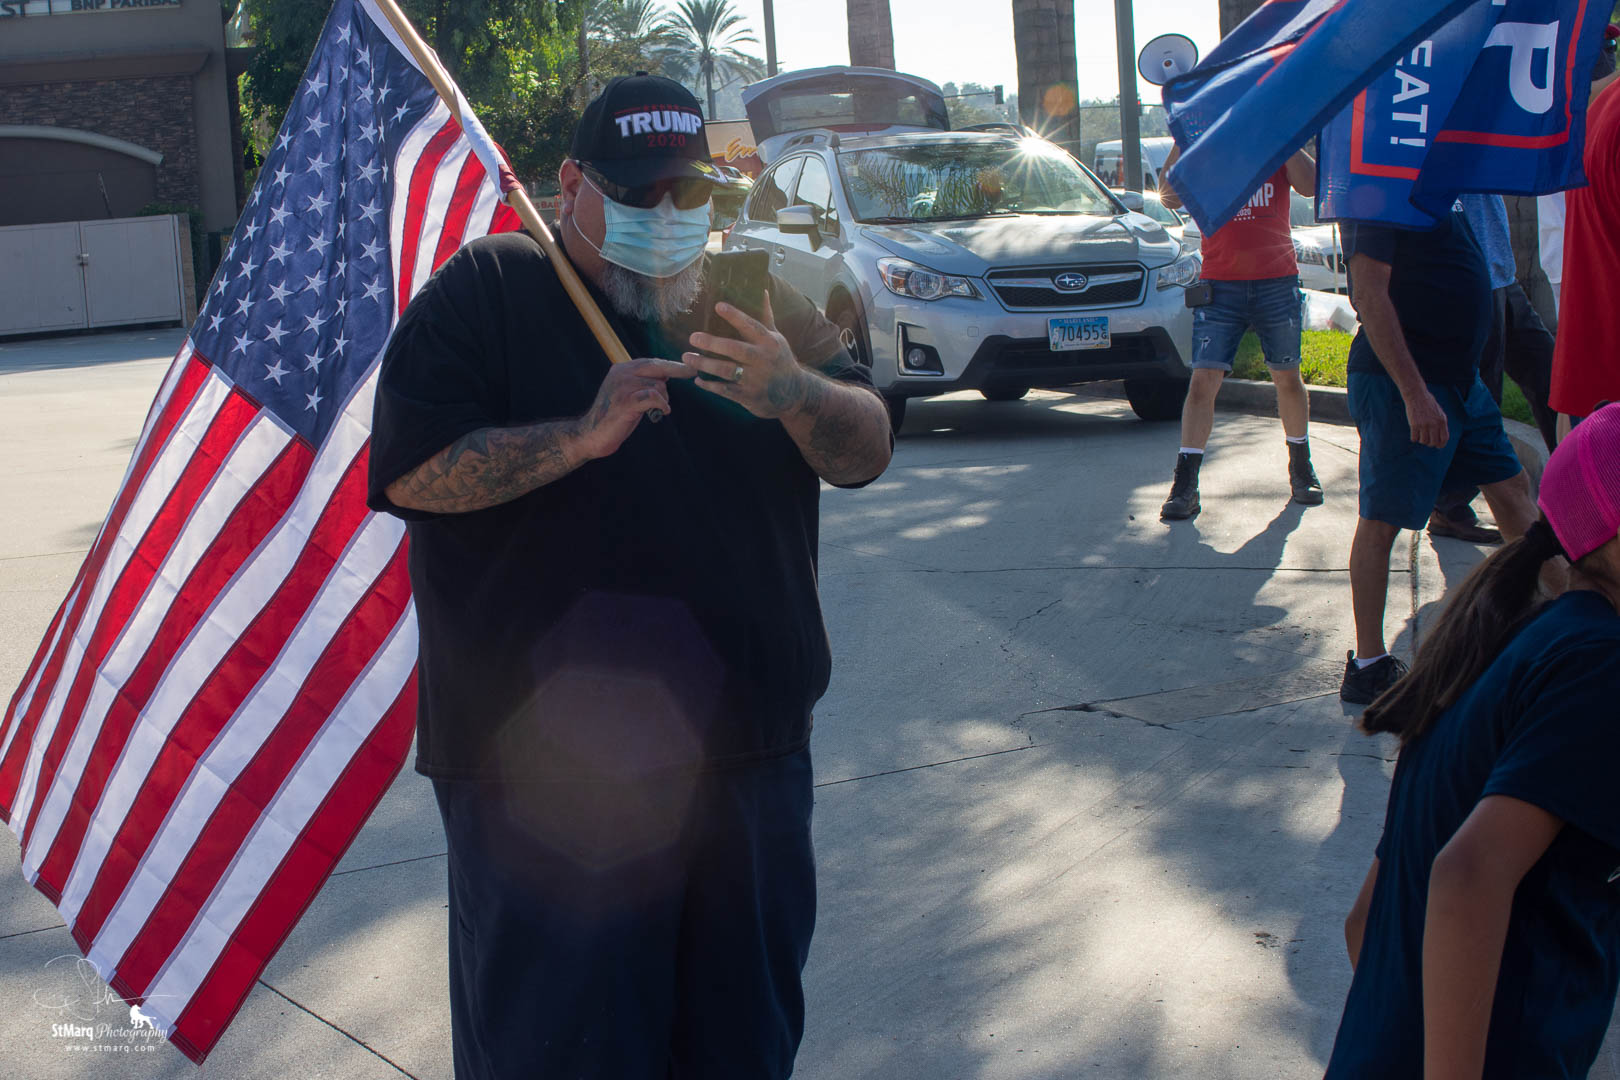 Ronnie Tagle walked and waved his large American flag at a Rally in support of president Trump on October 18, 2020 in La Habra, California. 